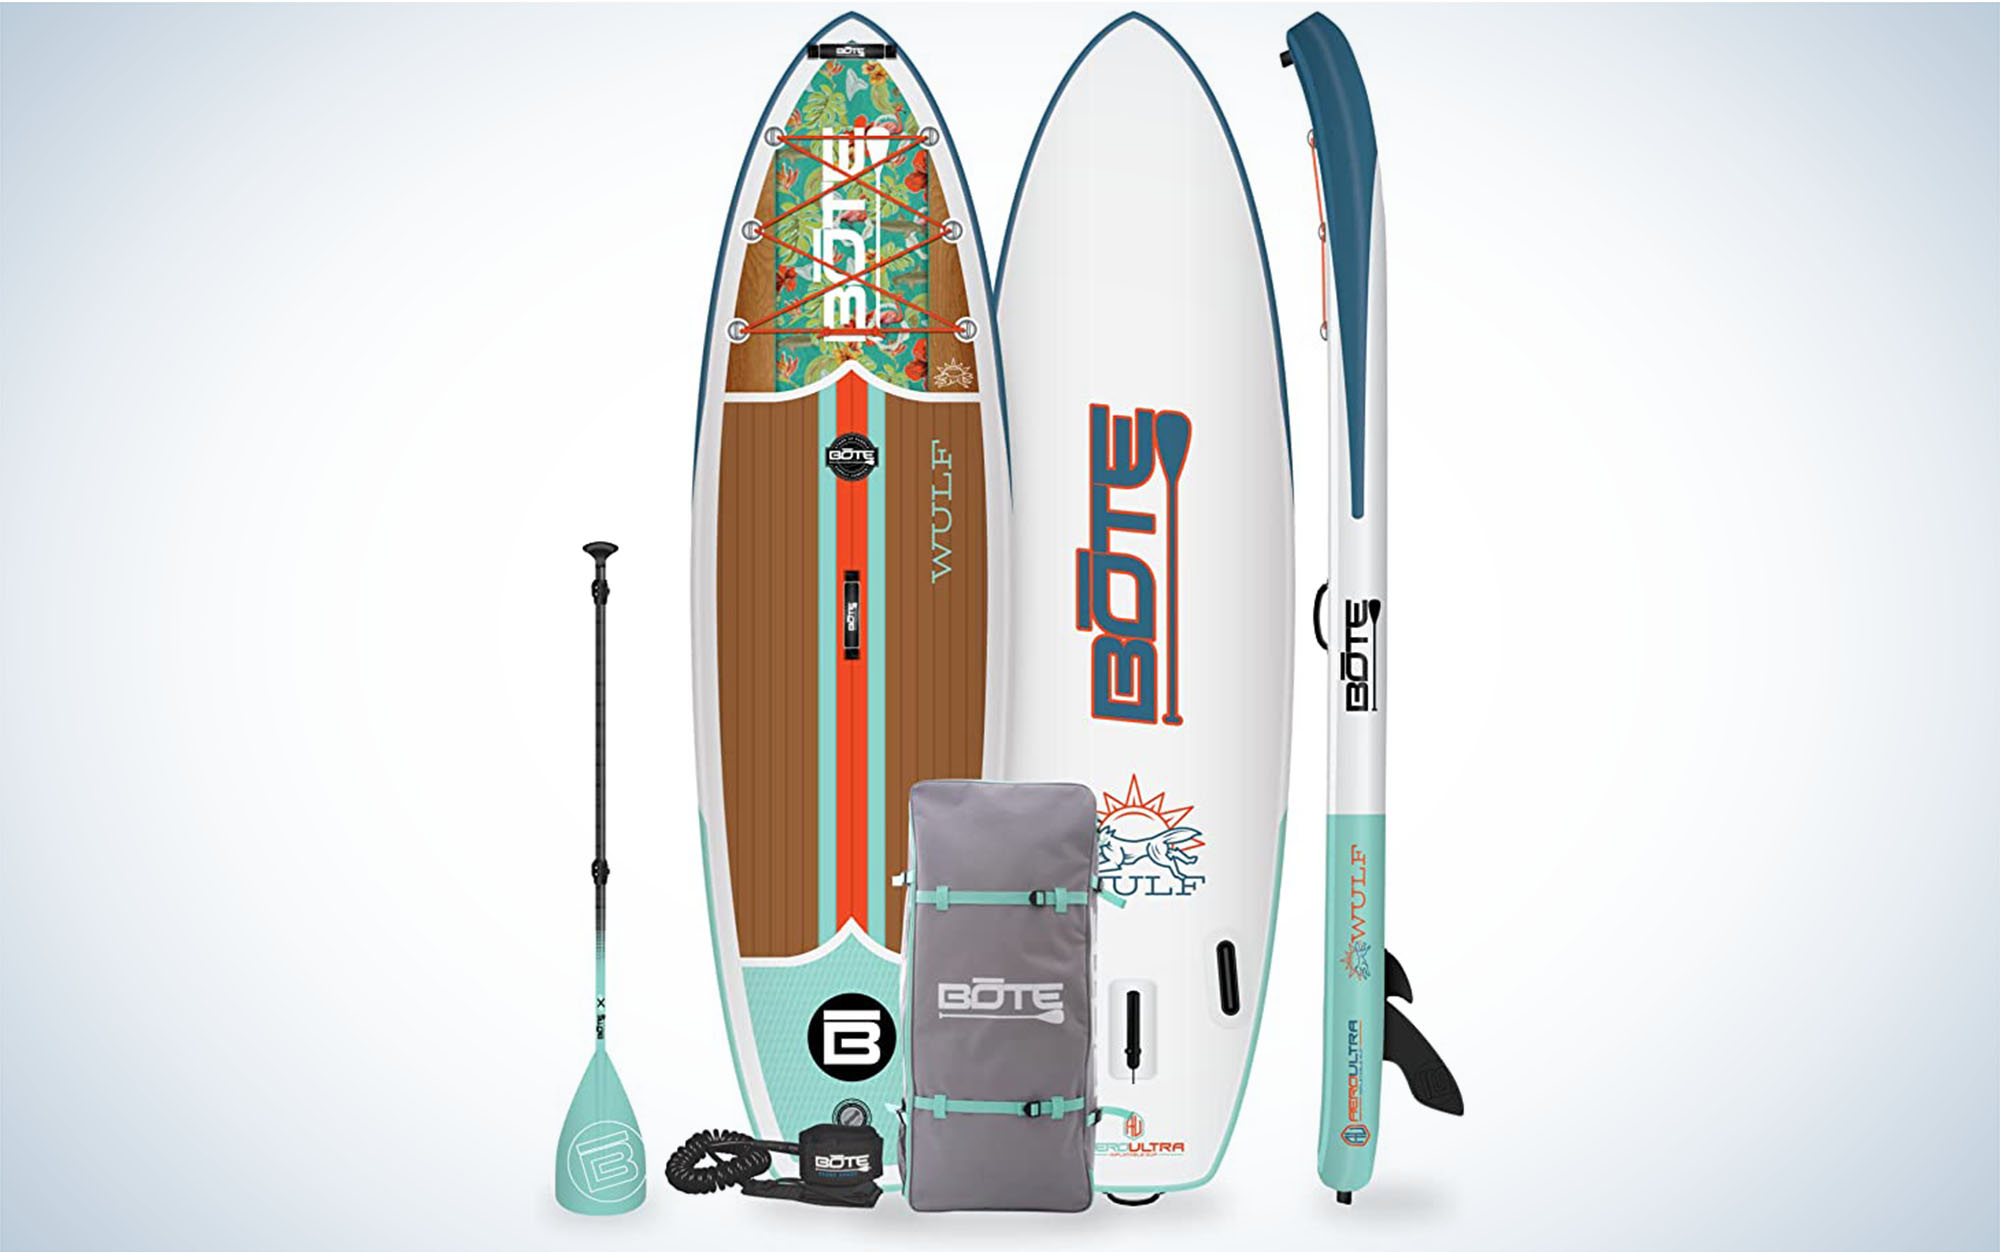 The Bote Wulf Aero is one of the best inflatable paddle boards.